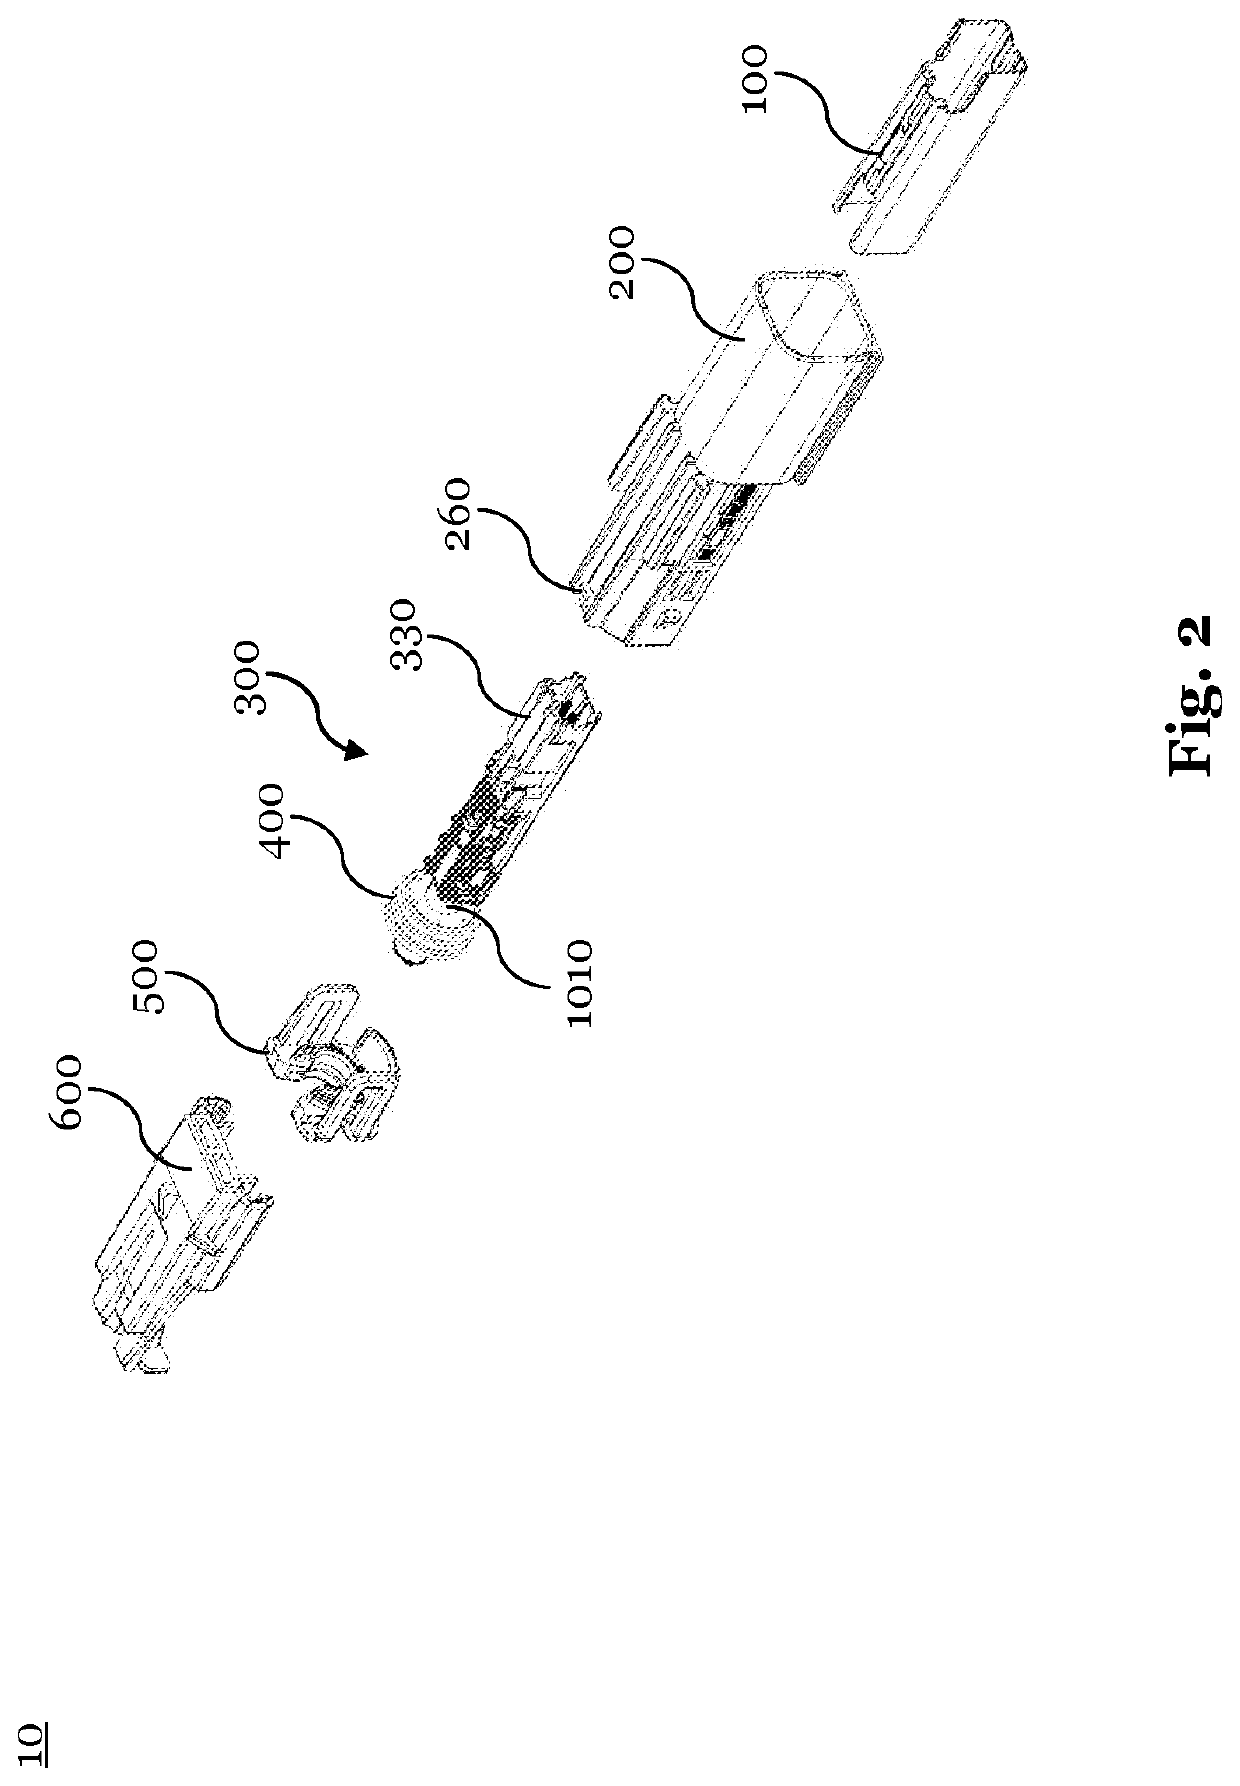 Electrical shielding member for a network connector